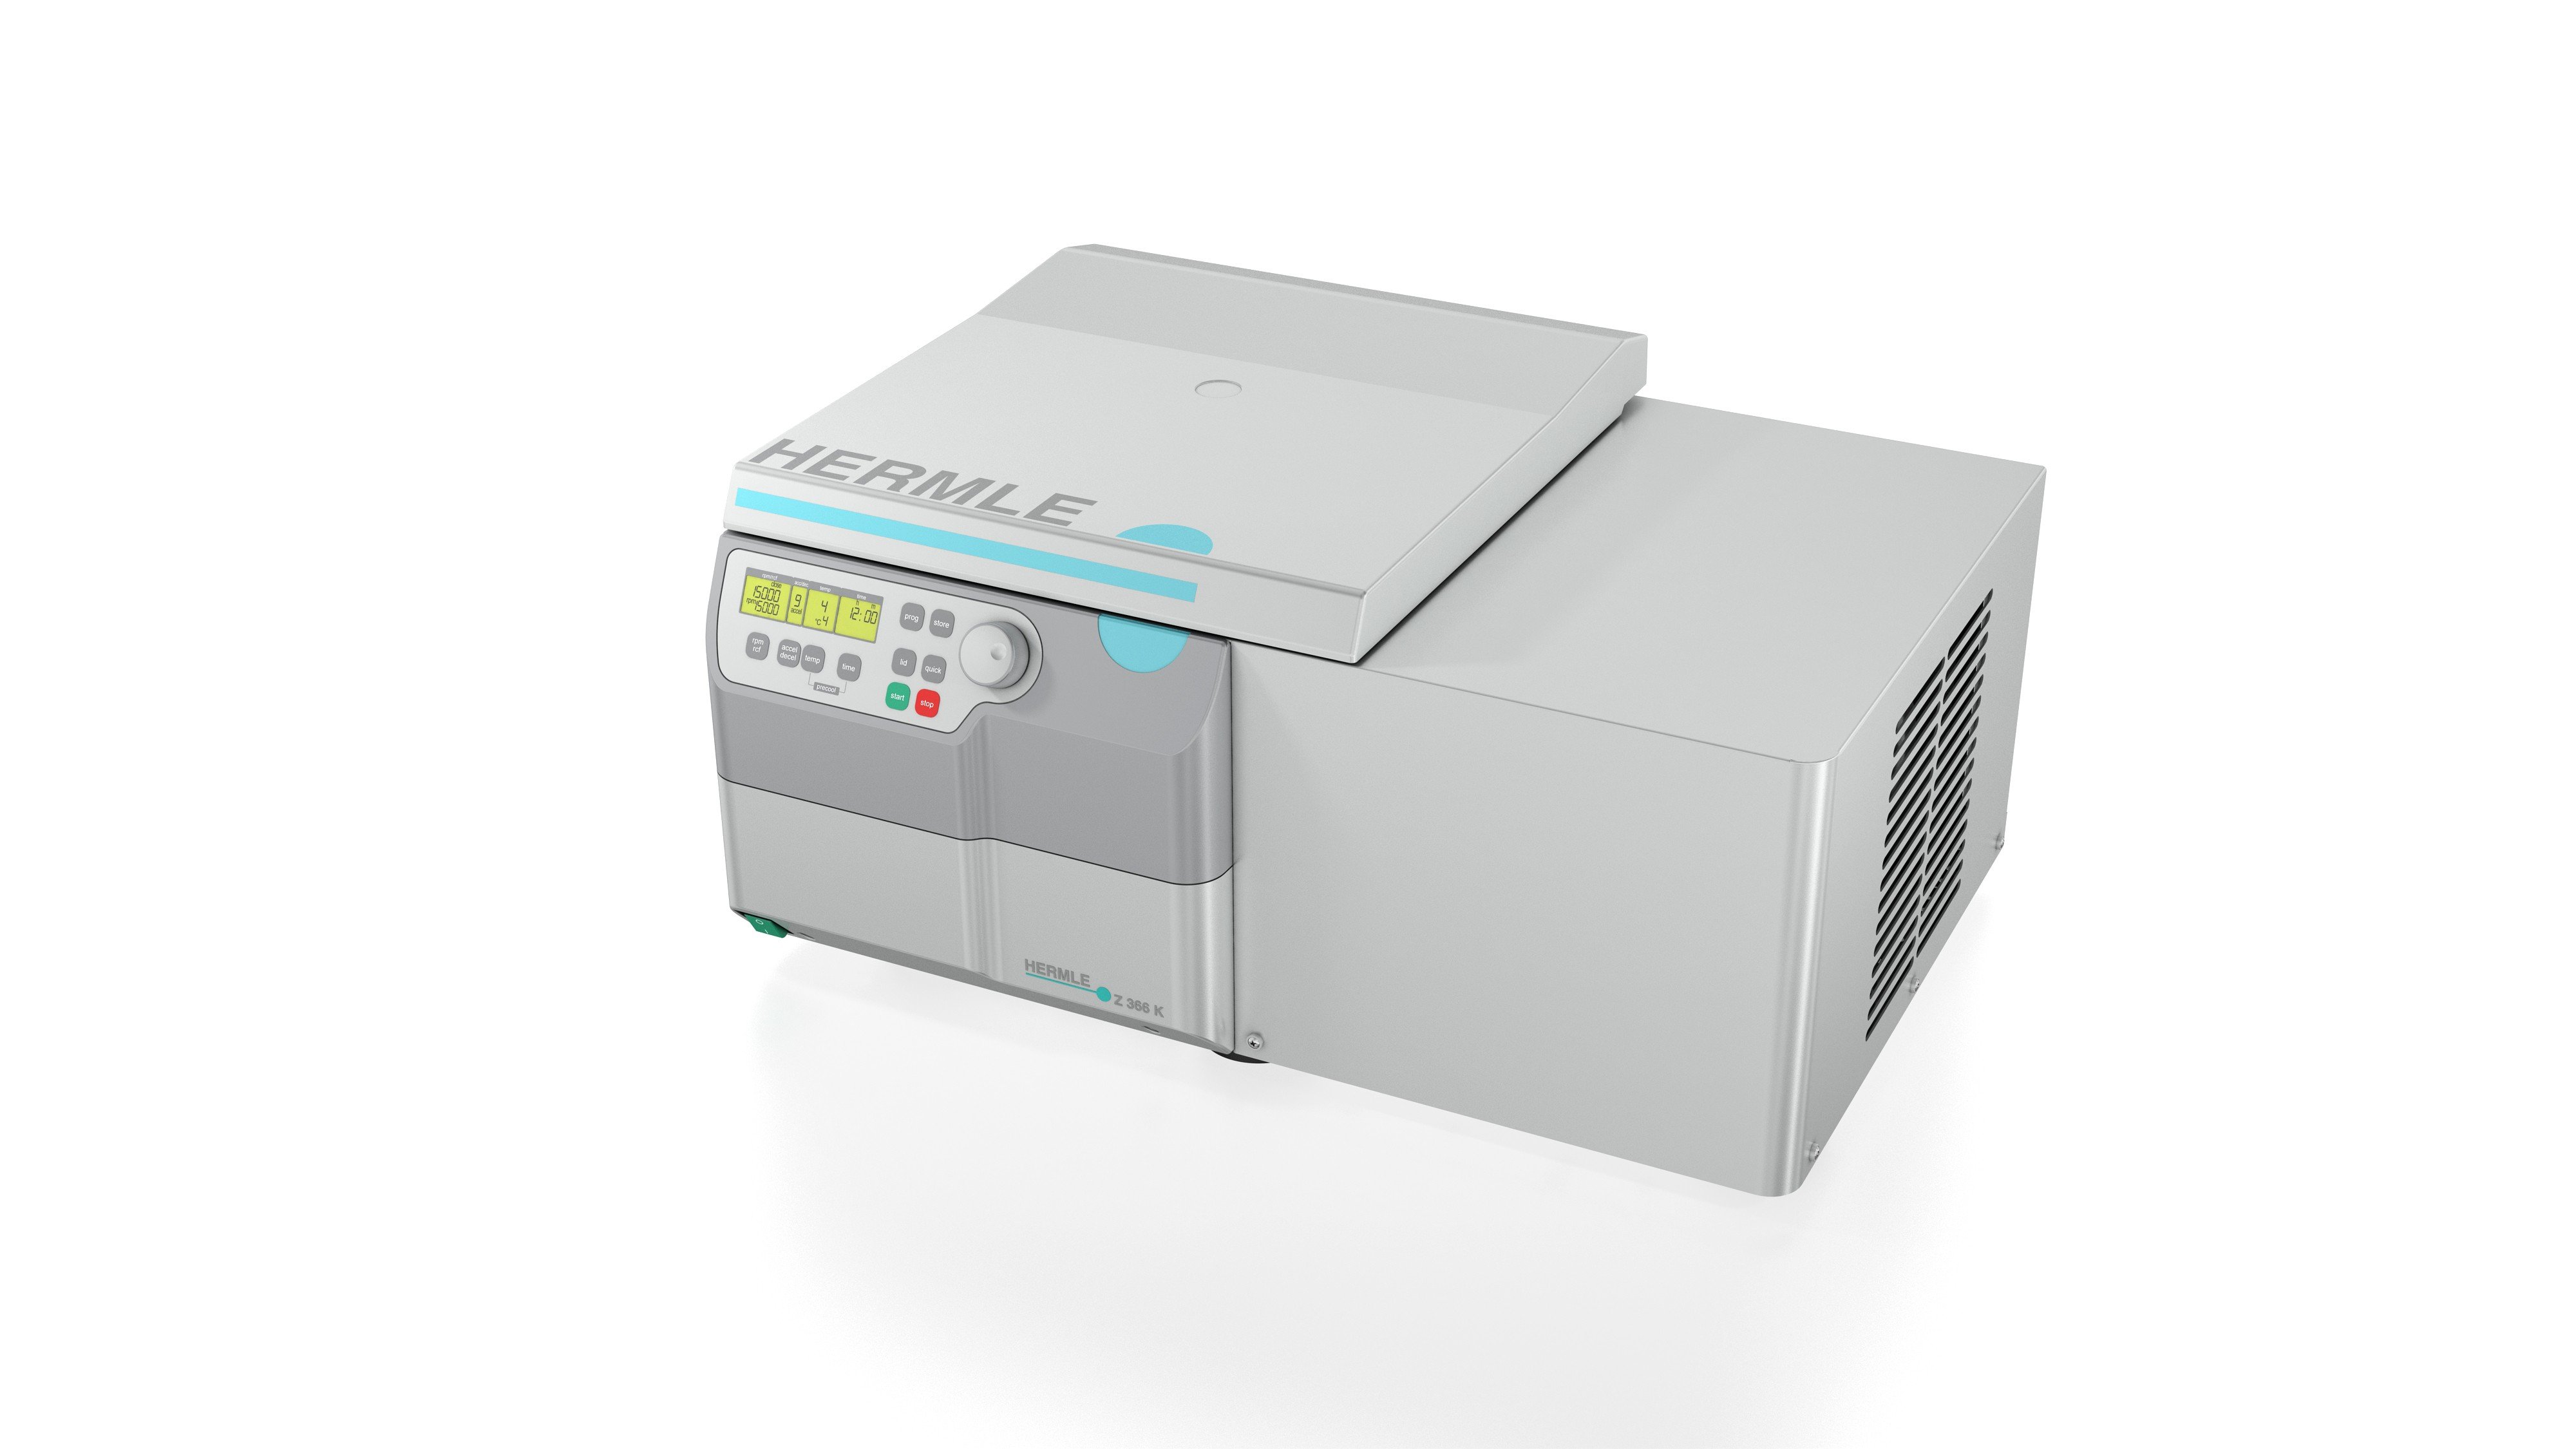 Hermle Z 366K Refrigerated Universal Table Top Centrifuge ,  Max Speed 16,000 rpm, Max RCF 24,325 xg, 6 x 250ml Max Volume, 230 V / 50 - 60 Hz / 240 W